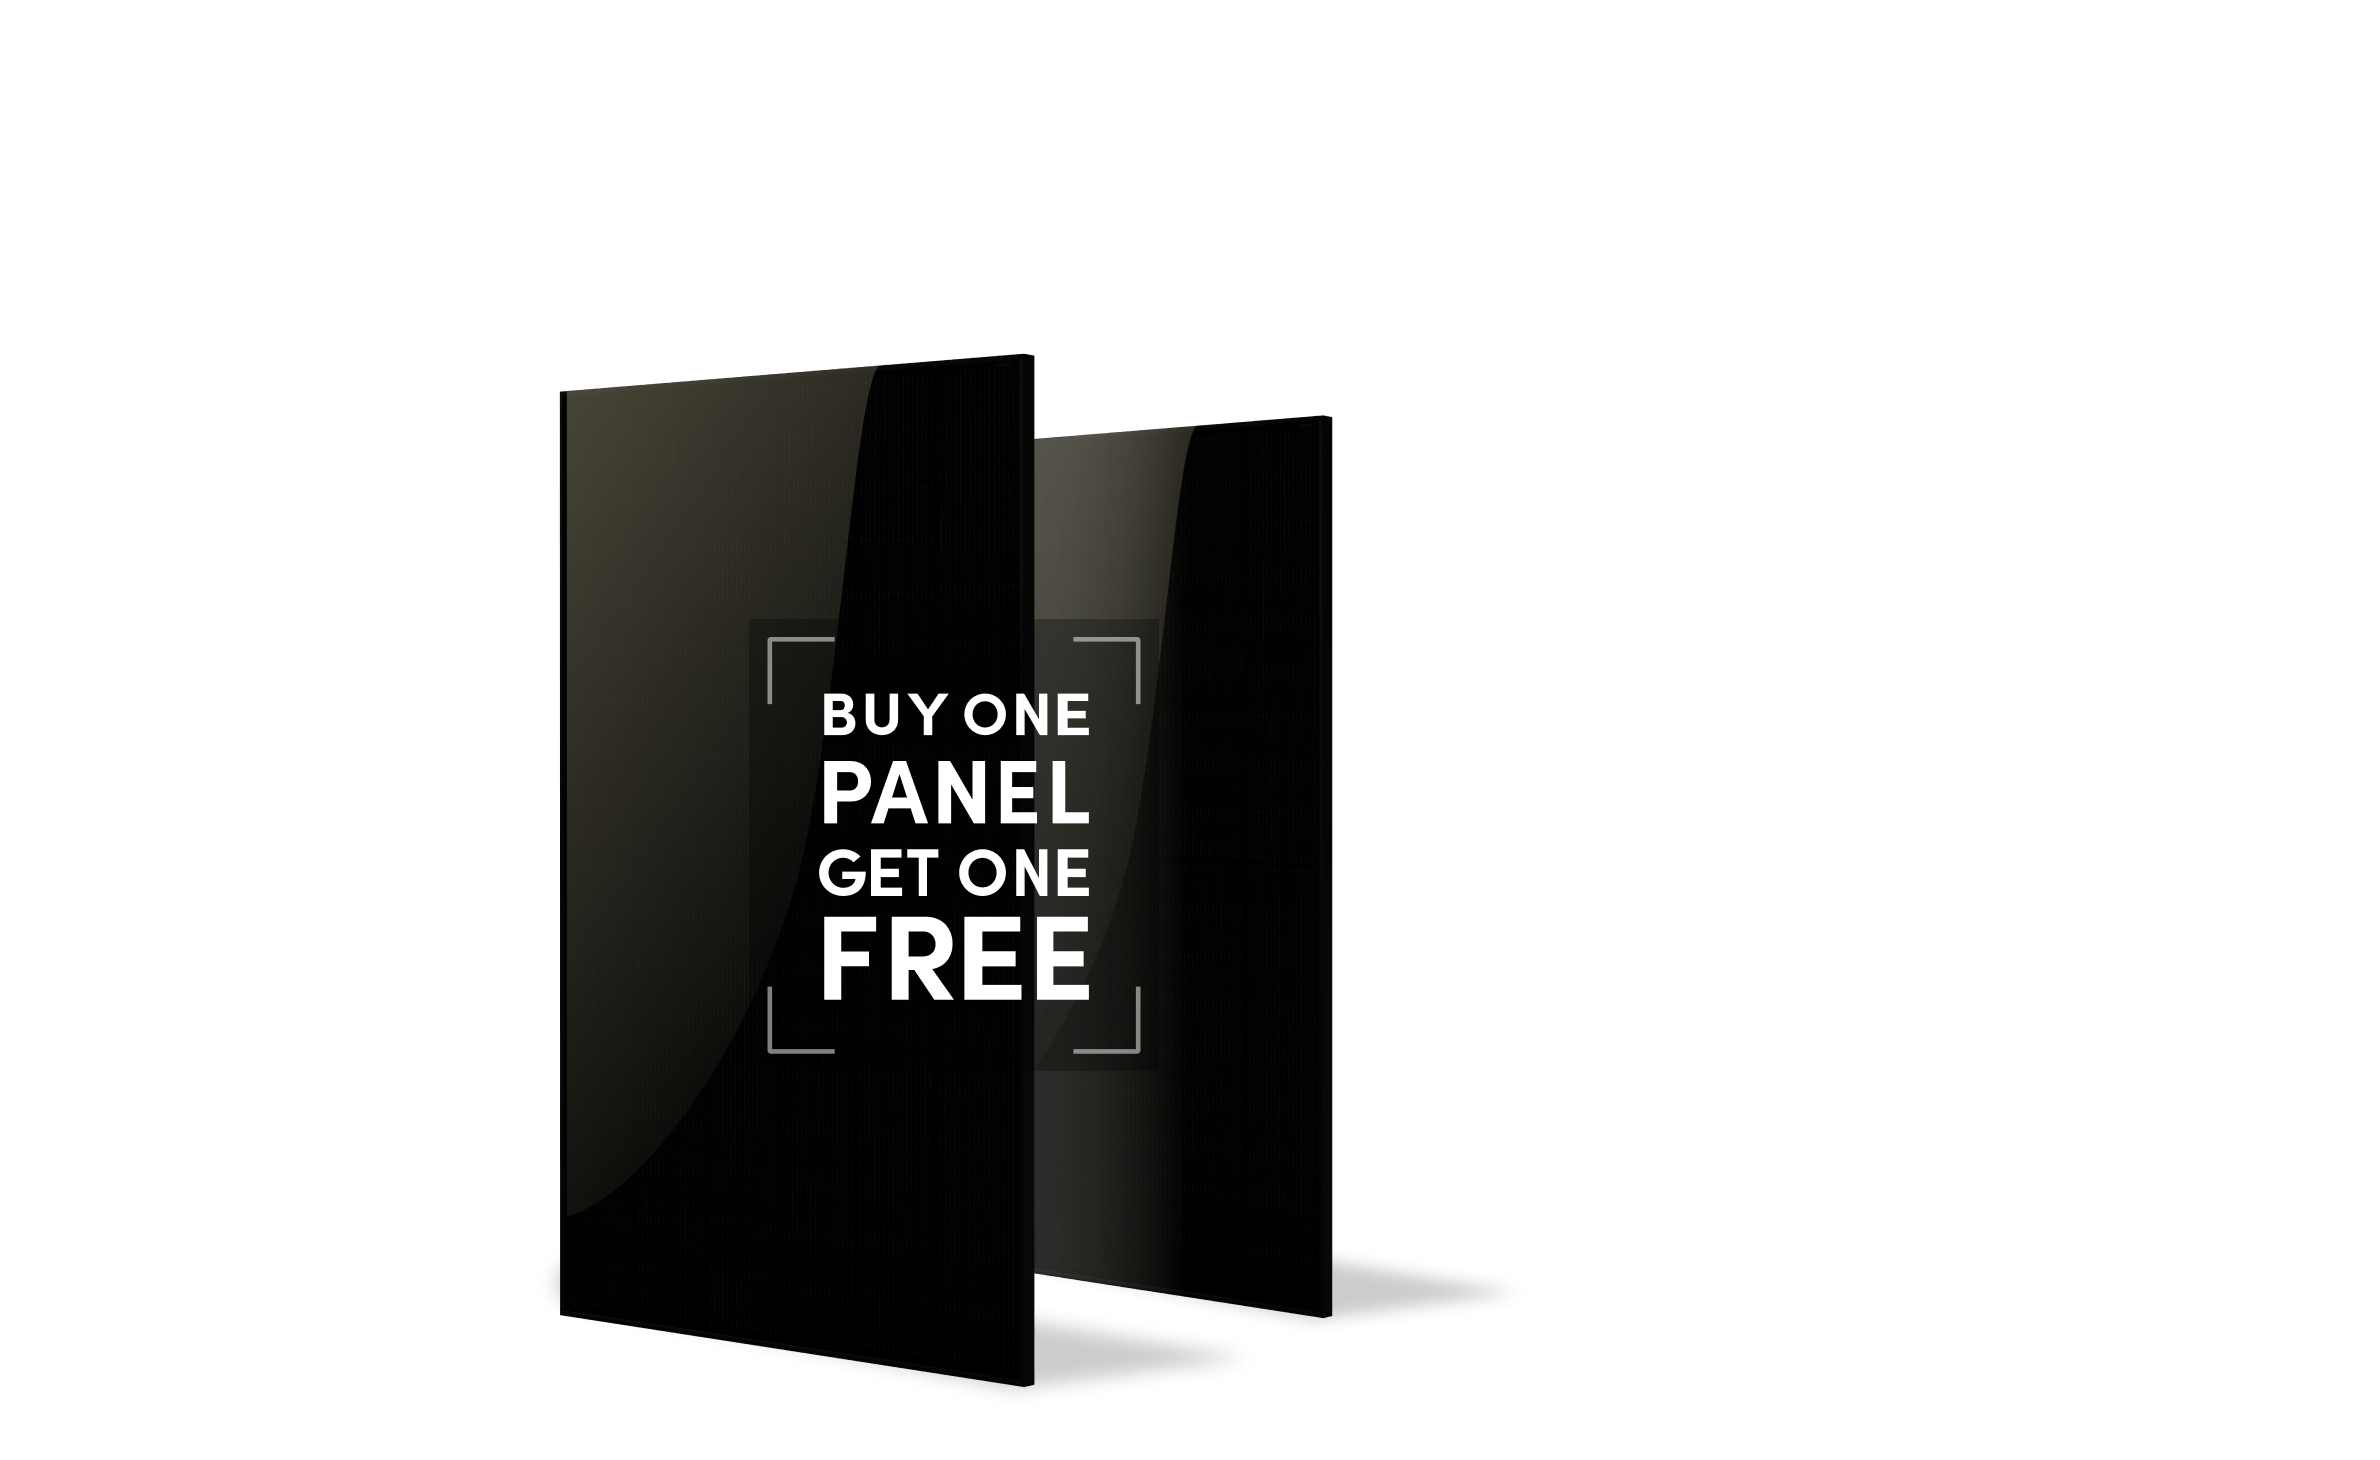 Buy one panel get one free promotion